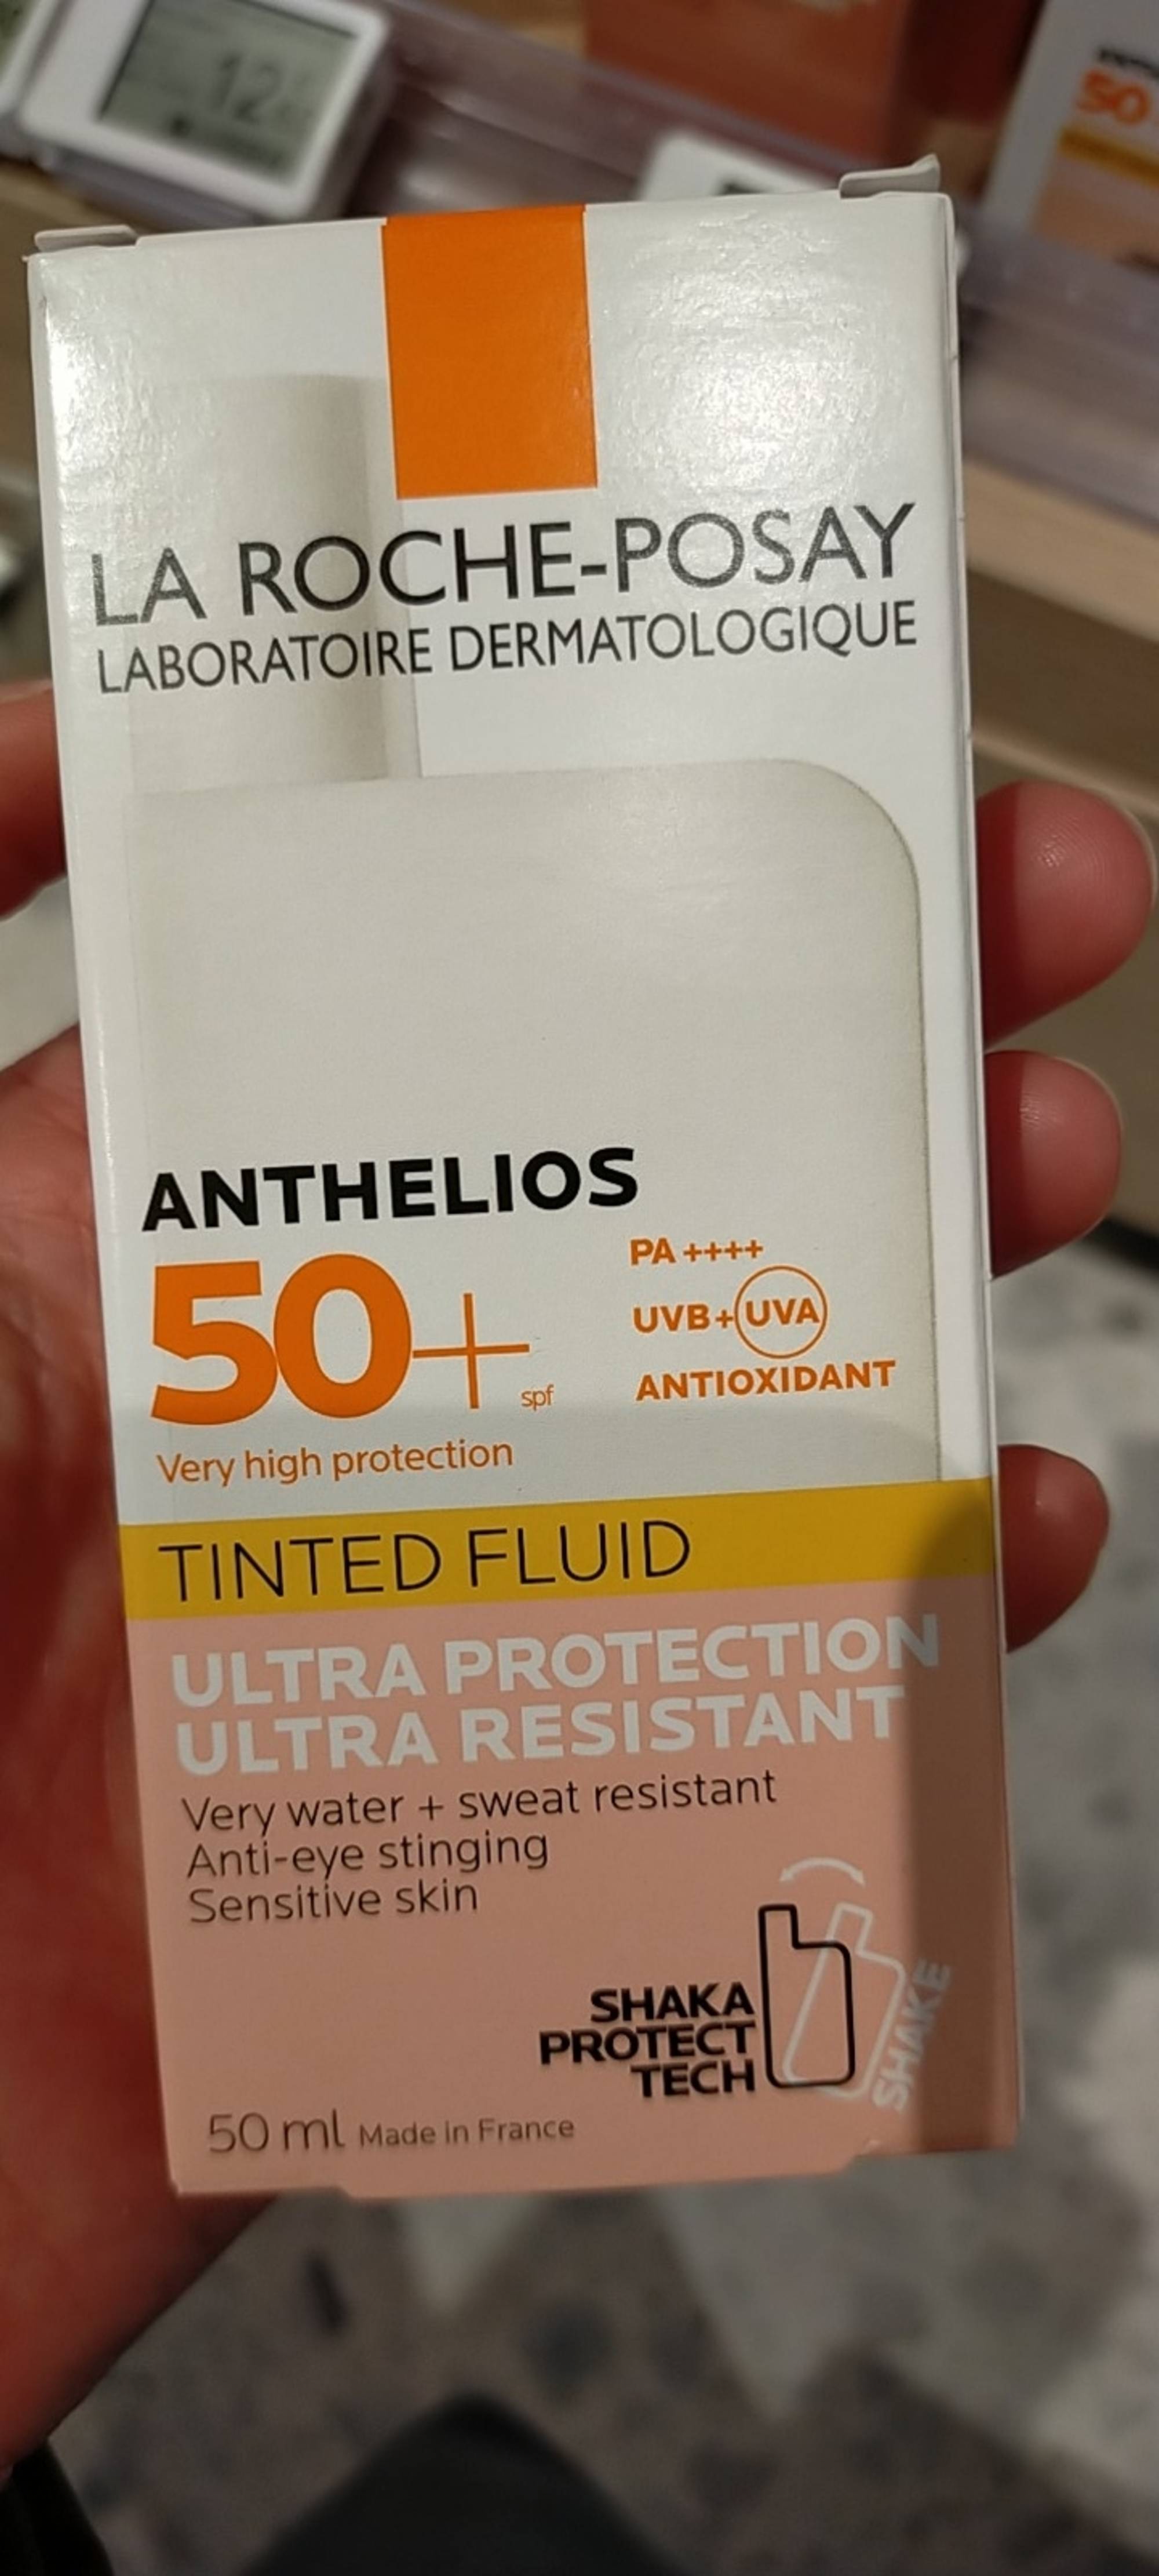 LA ROCHE-POSAY - Anthelios - Ultra protection SPF 50+